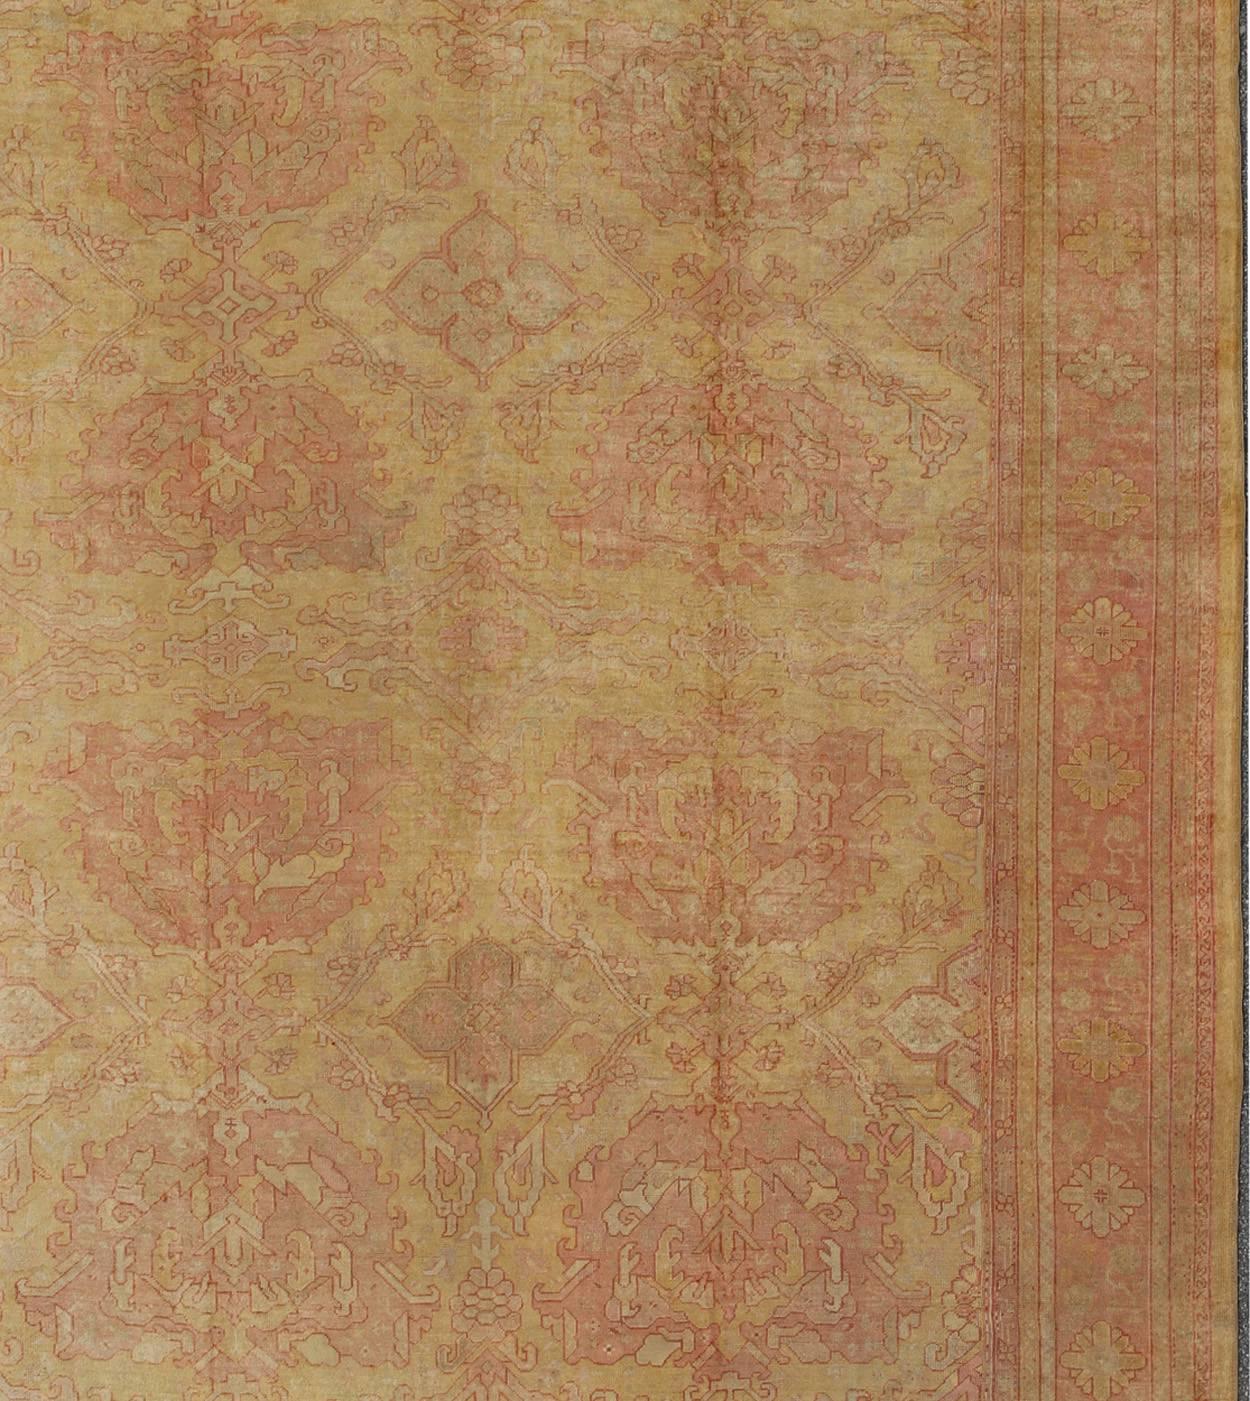 Antique Turkish Oushak Rug with Large Floral Motifs in Cream Yellow, Muted Coral In Good Condition For Sale In Atlanta, GA